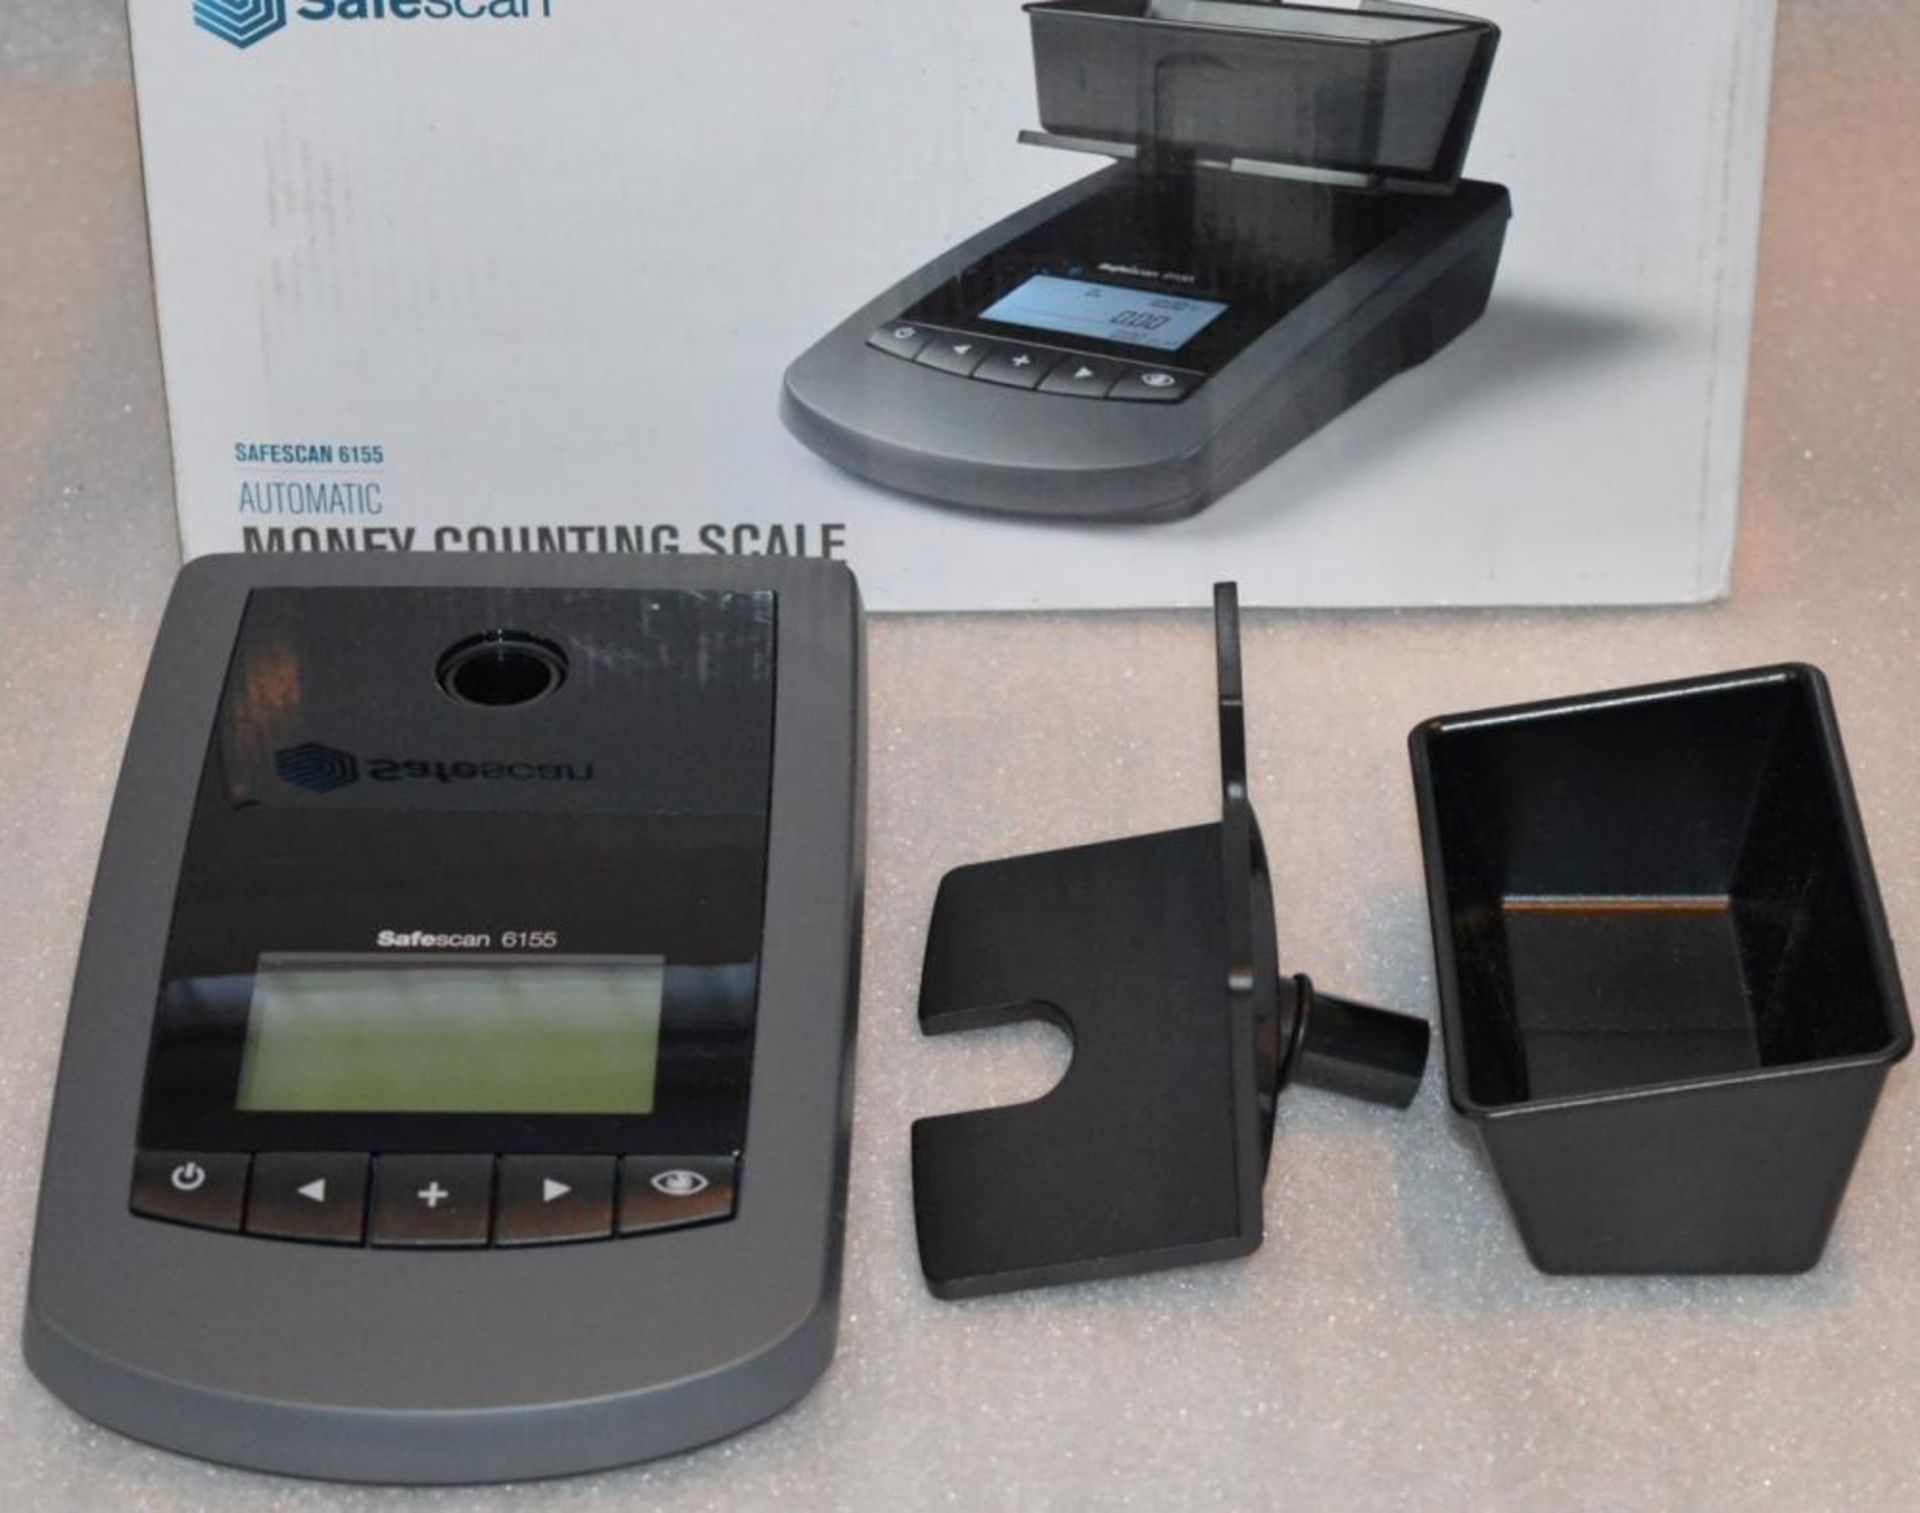 1 x SafeScan 6155 Coin and Bank Note Counter - Includes Coin and Note Trays, Box, Instructions and - Image 5 of 10